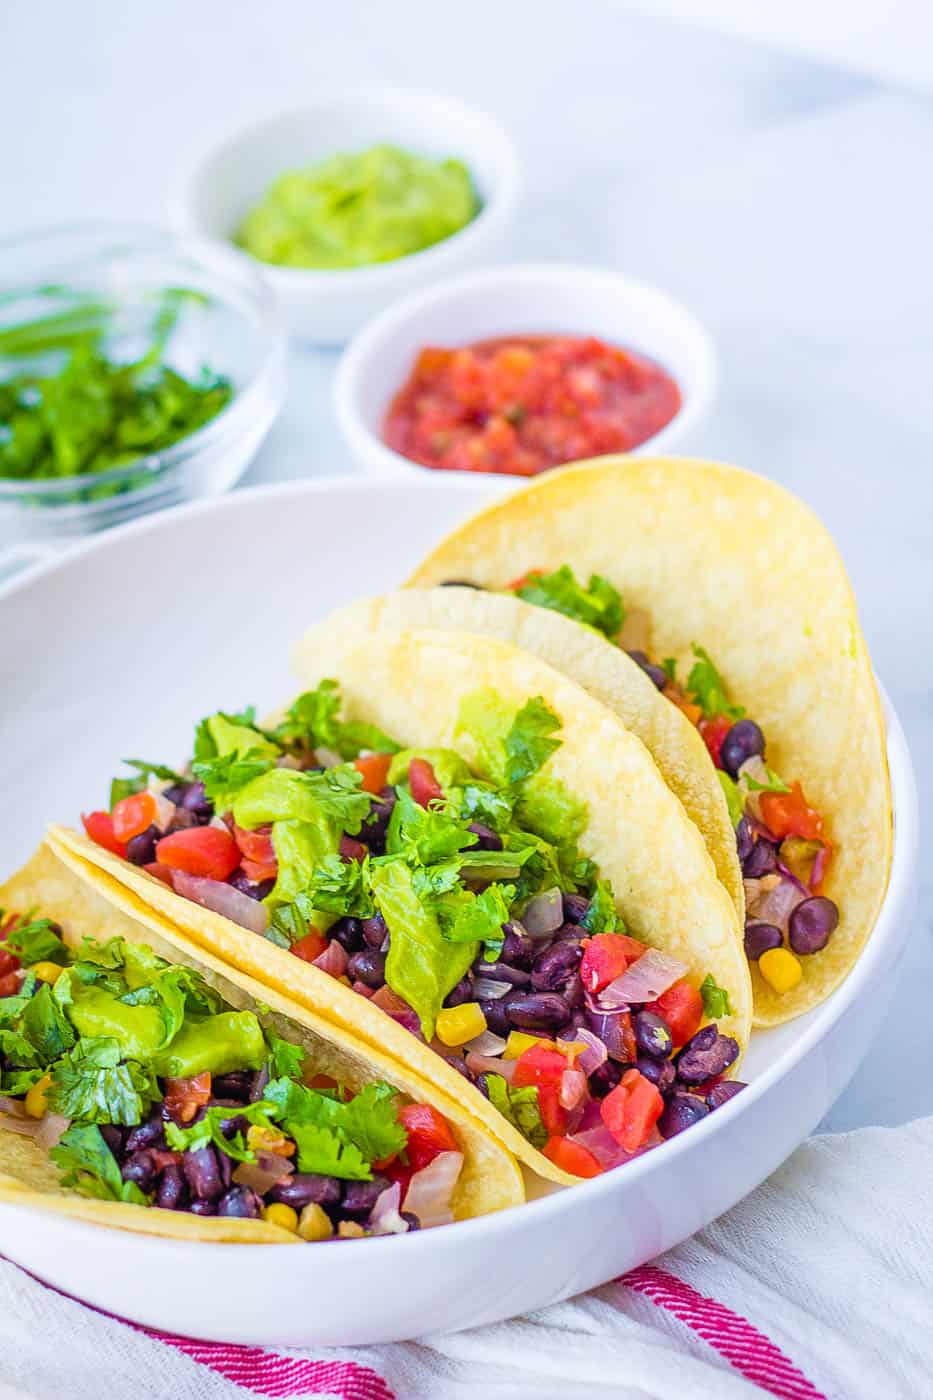 Vegan black bean tacos with avocado, greens and cilantro served on a white plate